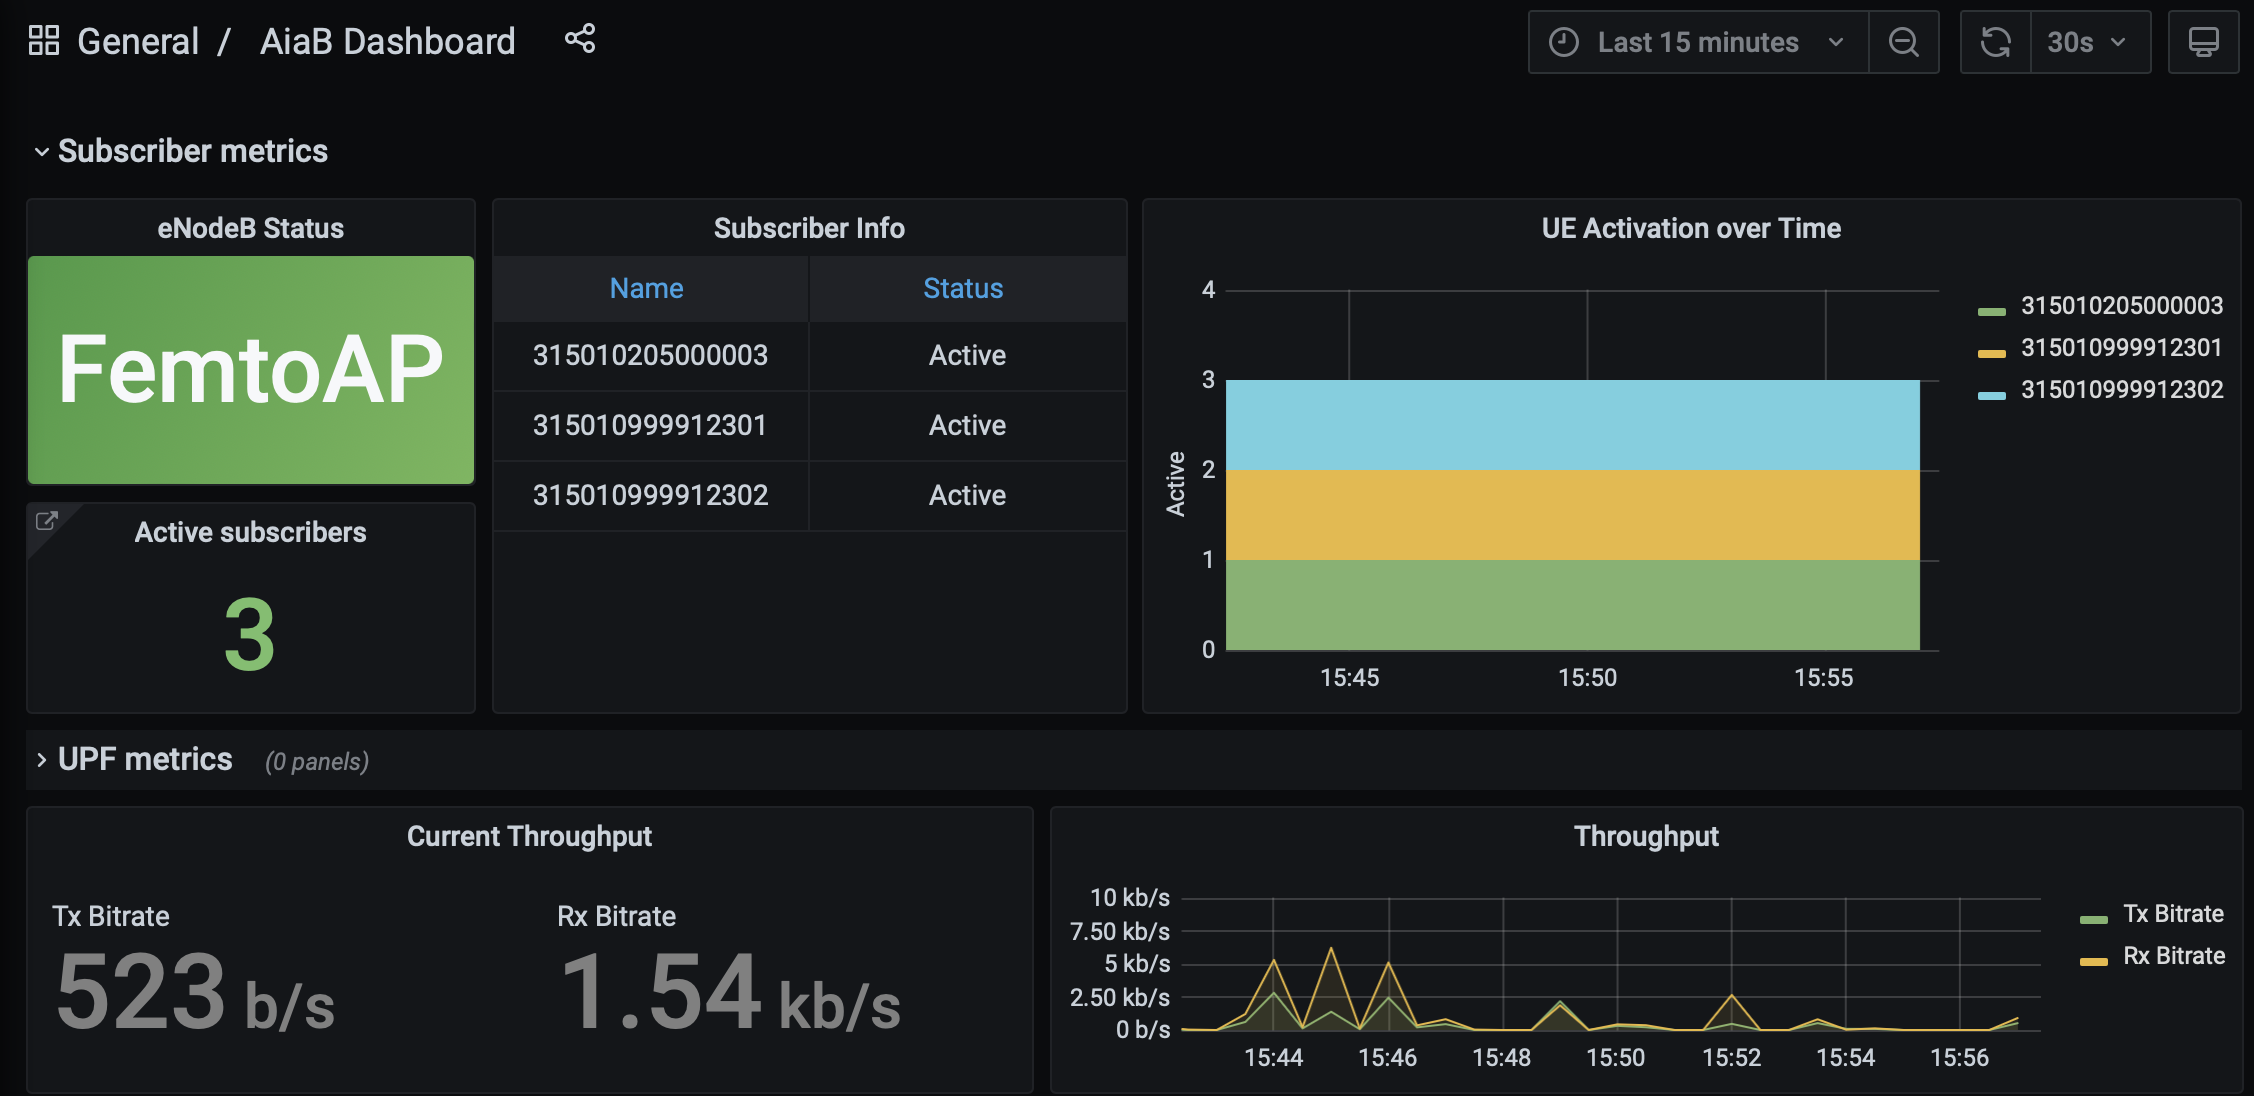 ../_images/4g-aiab-grafana-dashboard.png